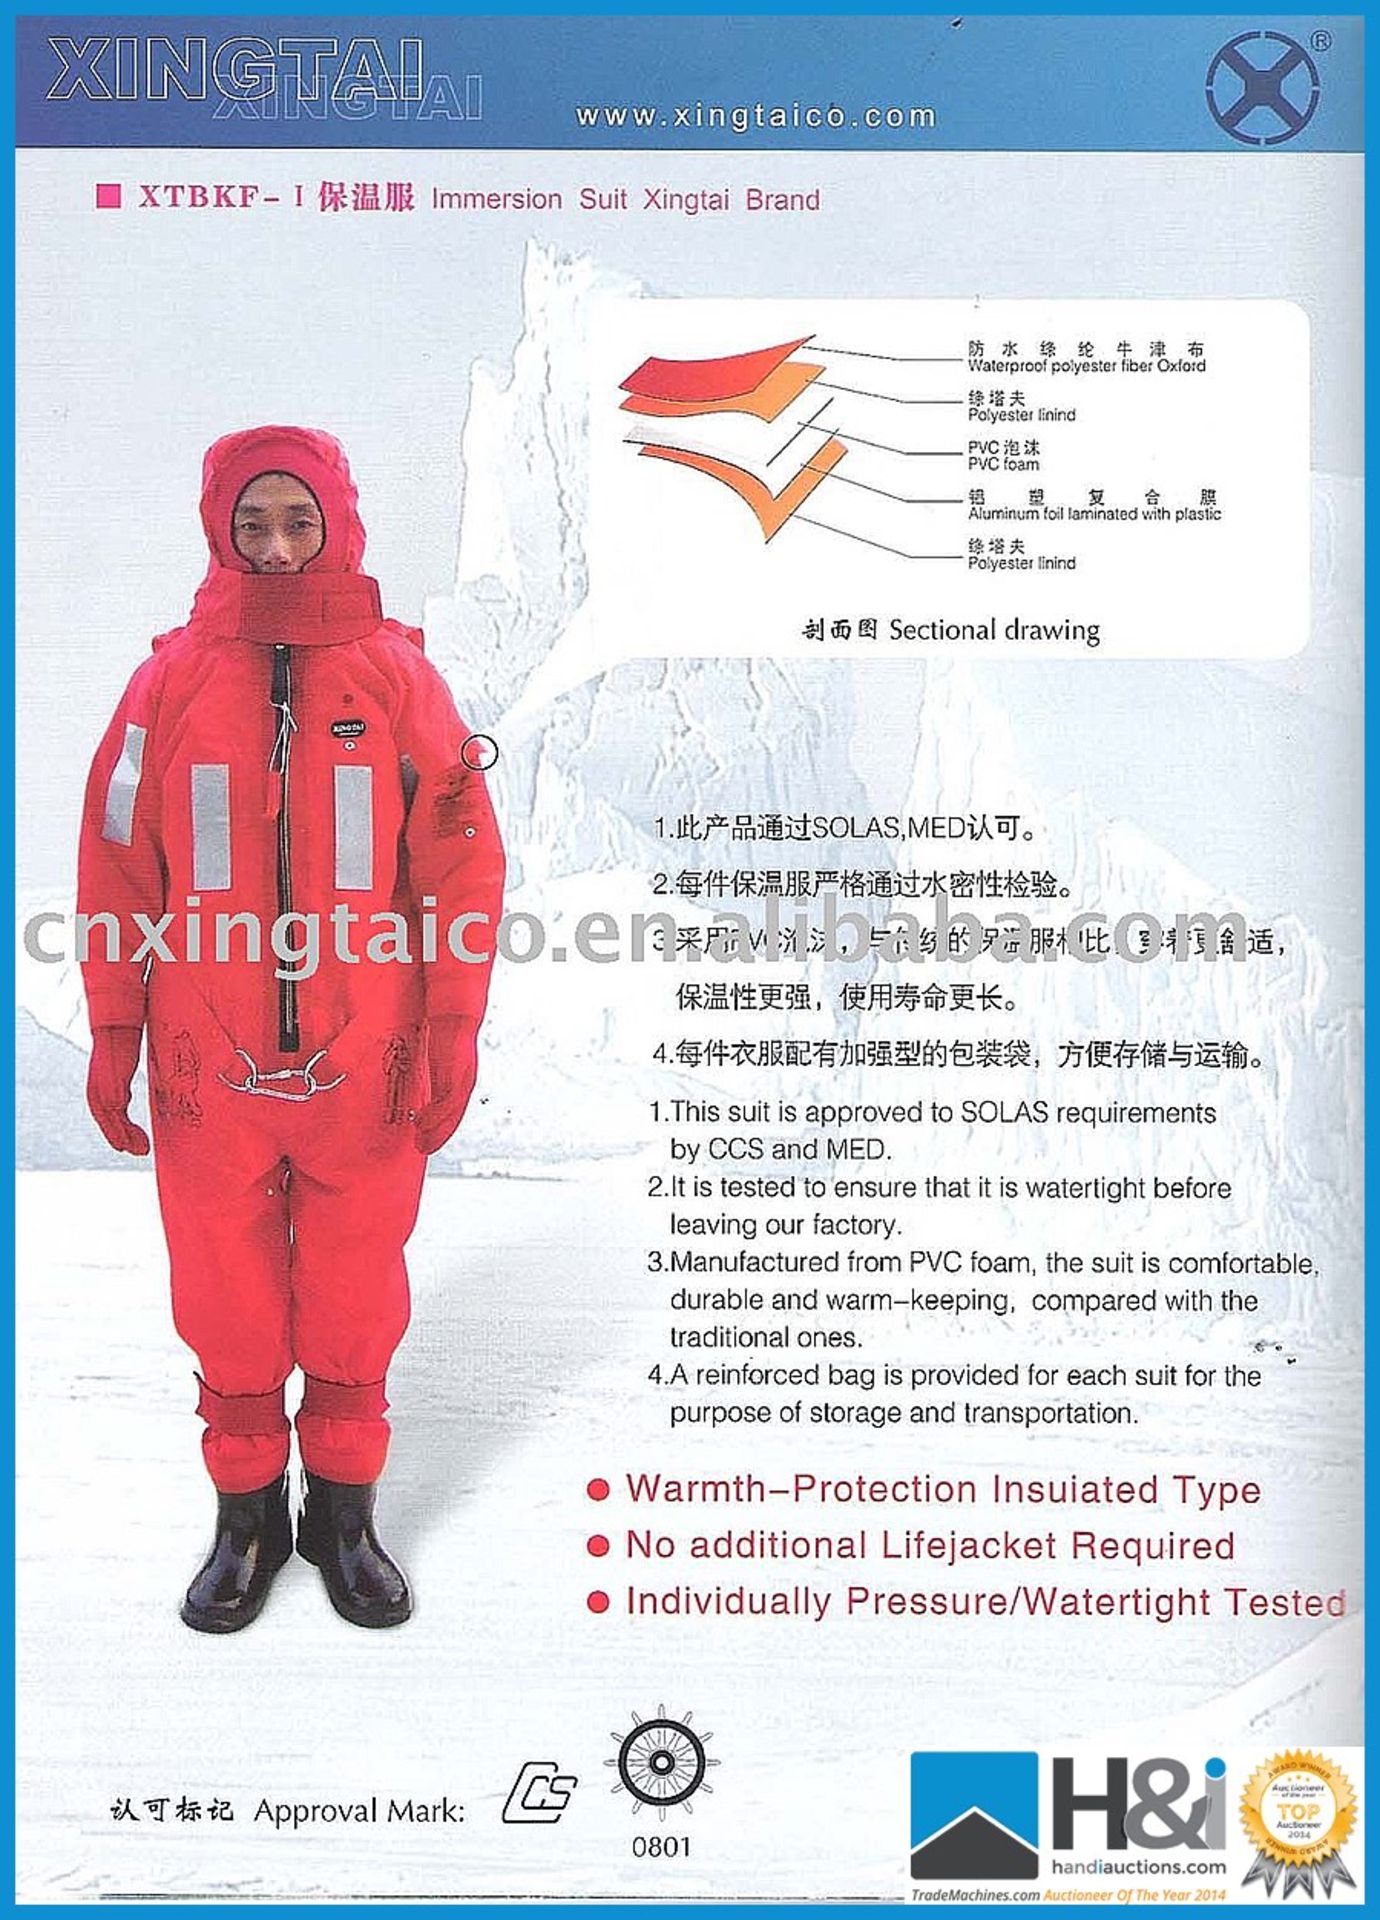 Wuxi Xingtal Immersion Suit. Approved to SOLAS requirements by CCS and MED. Manufactured from PVC